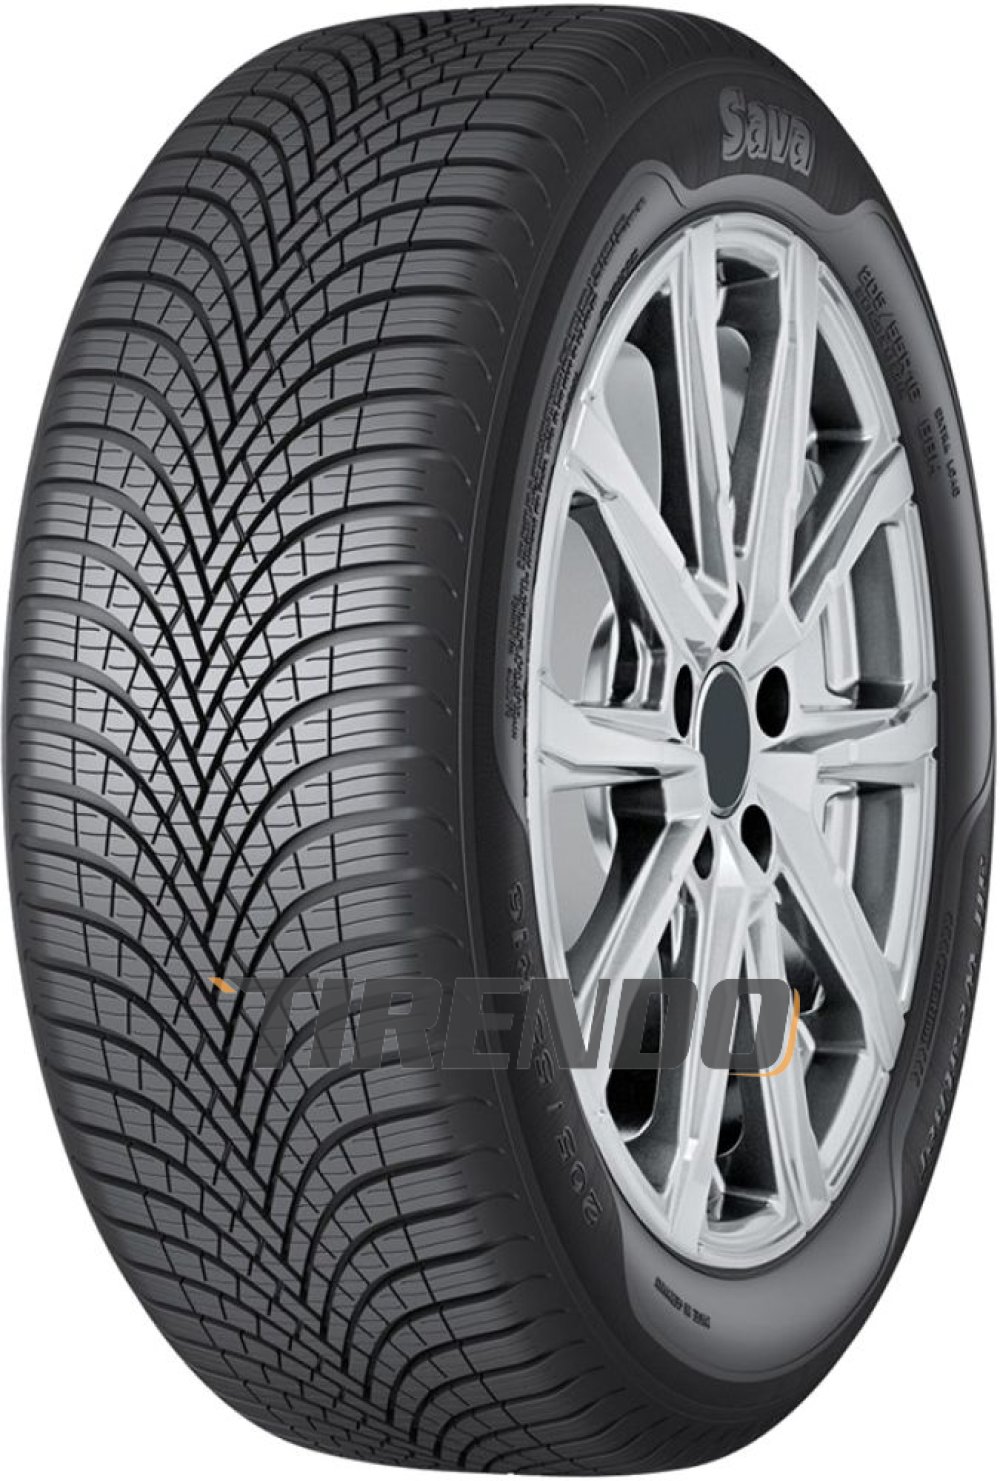 Image of Sava All Weather ( 225/45 R17 94V XL )